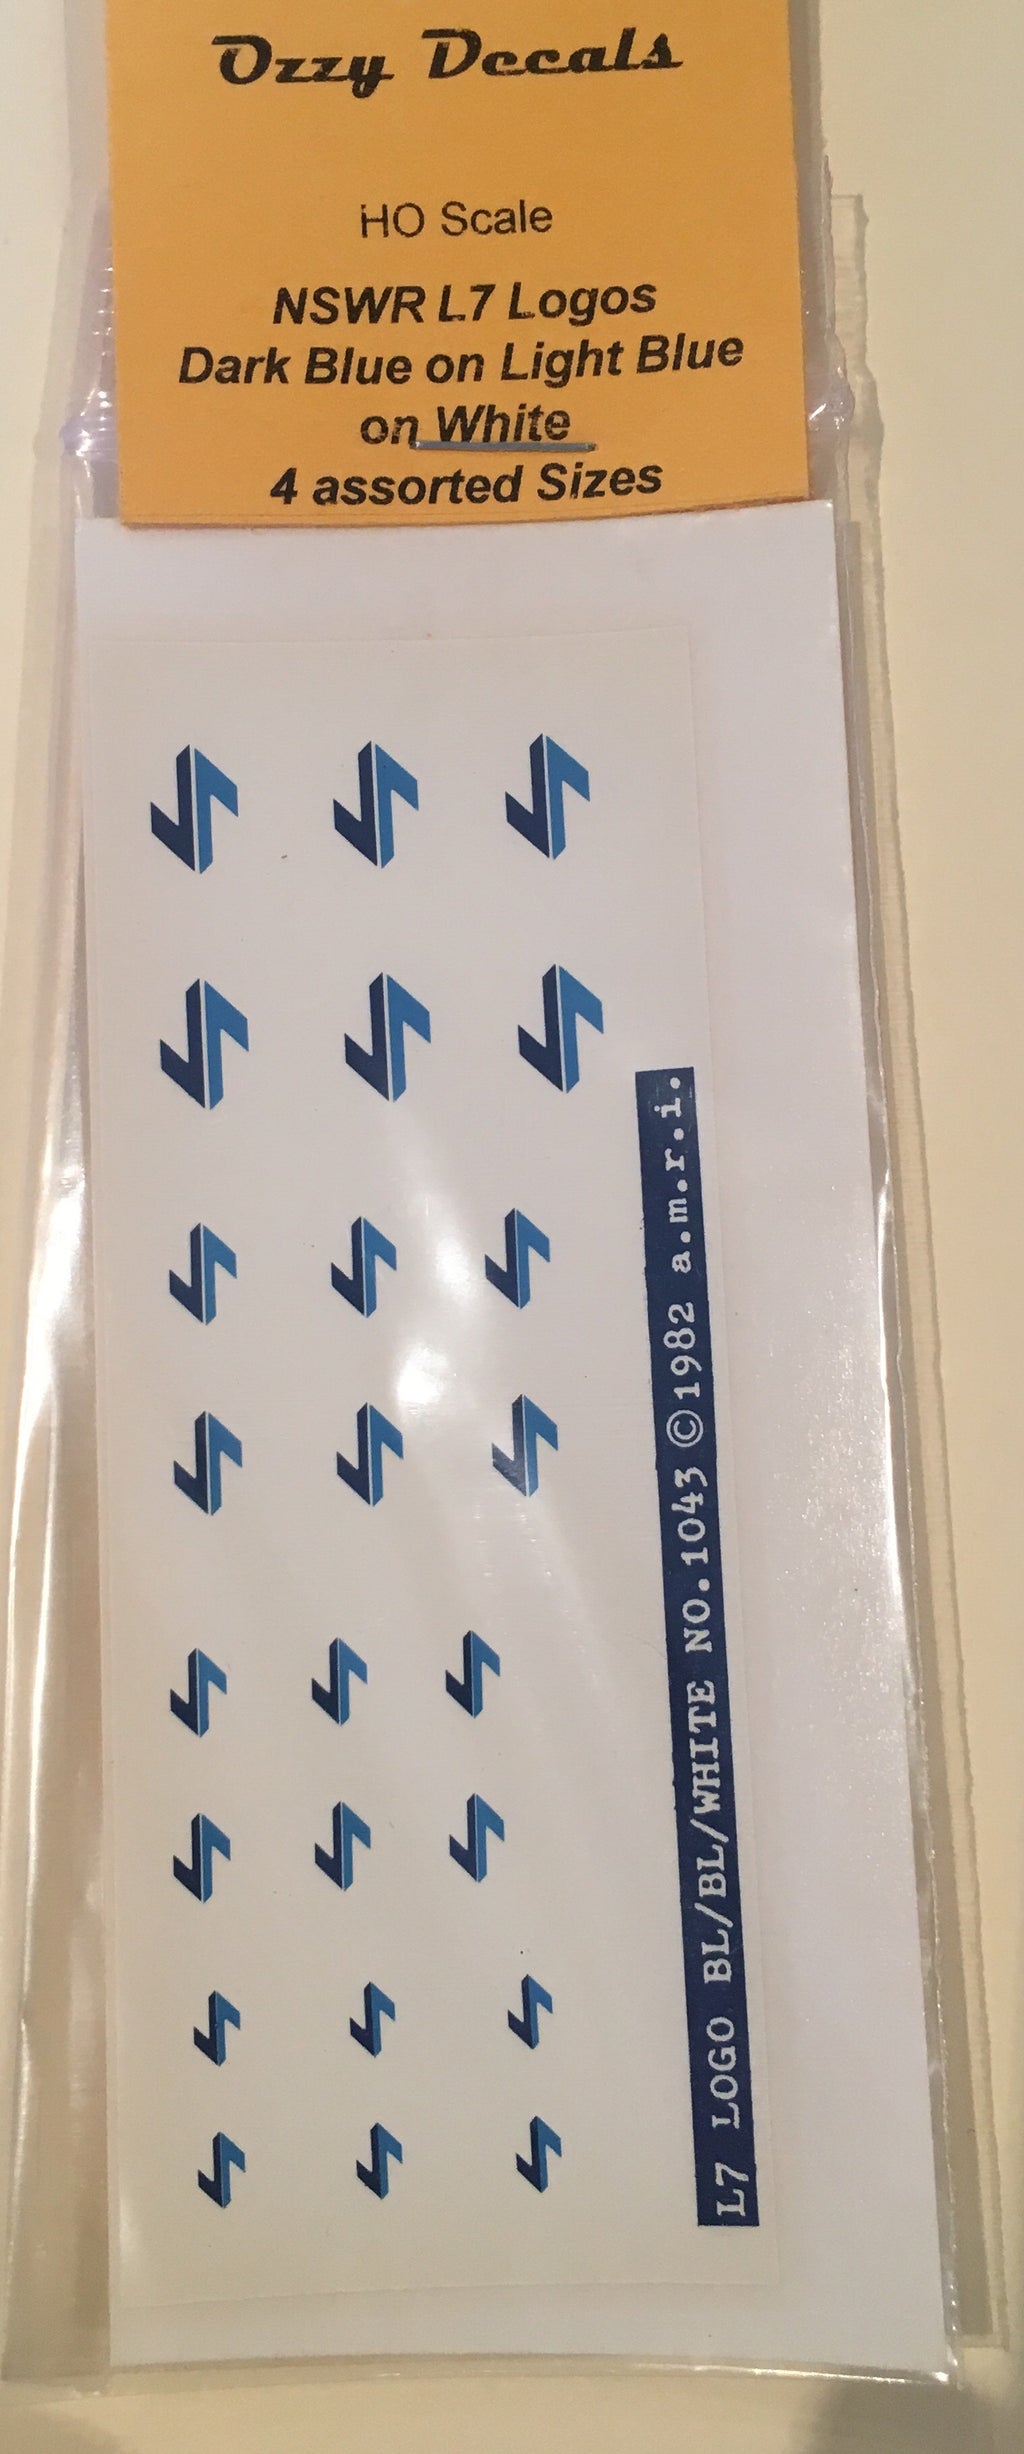 Ozzy Decals: LOGO'S #1043 NSW / SRA L7 4 assorted sizes, Dark Blue on Light Blue on white